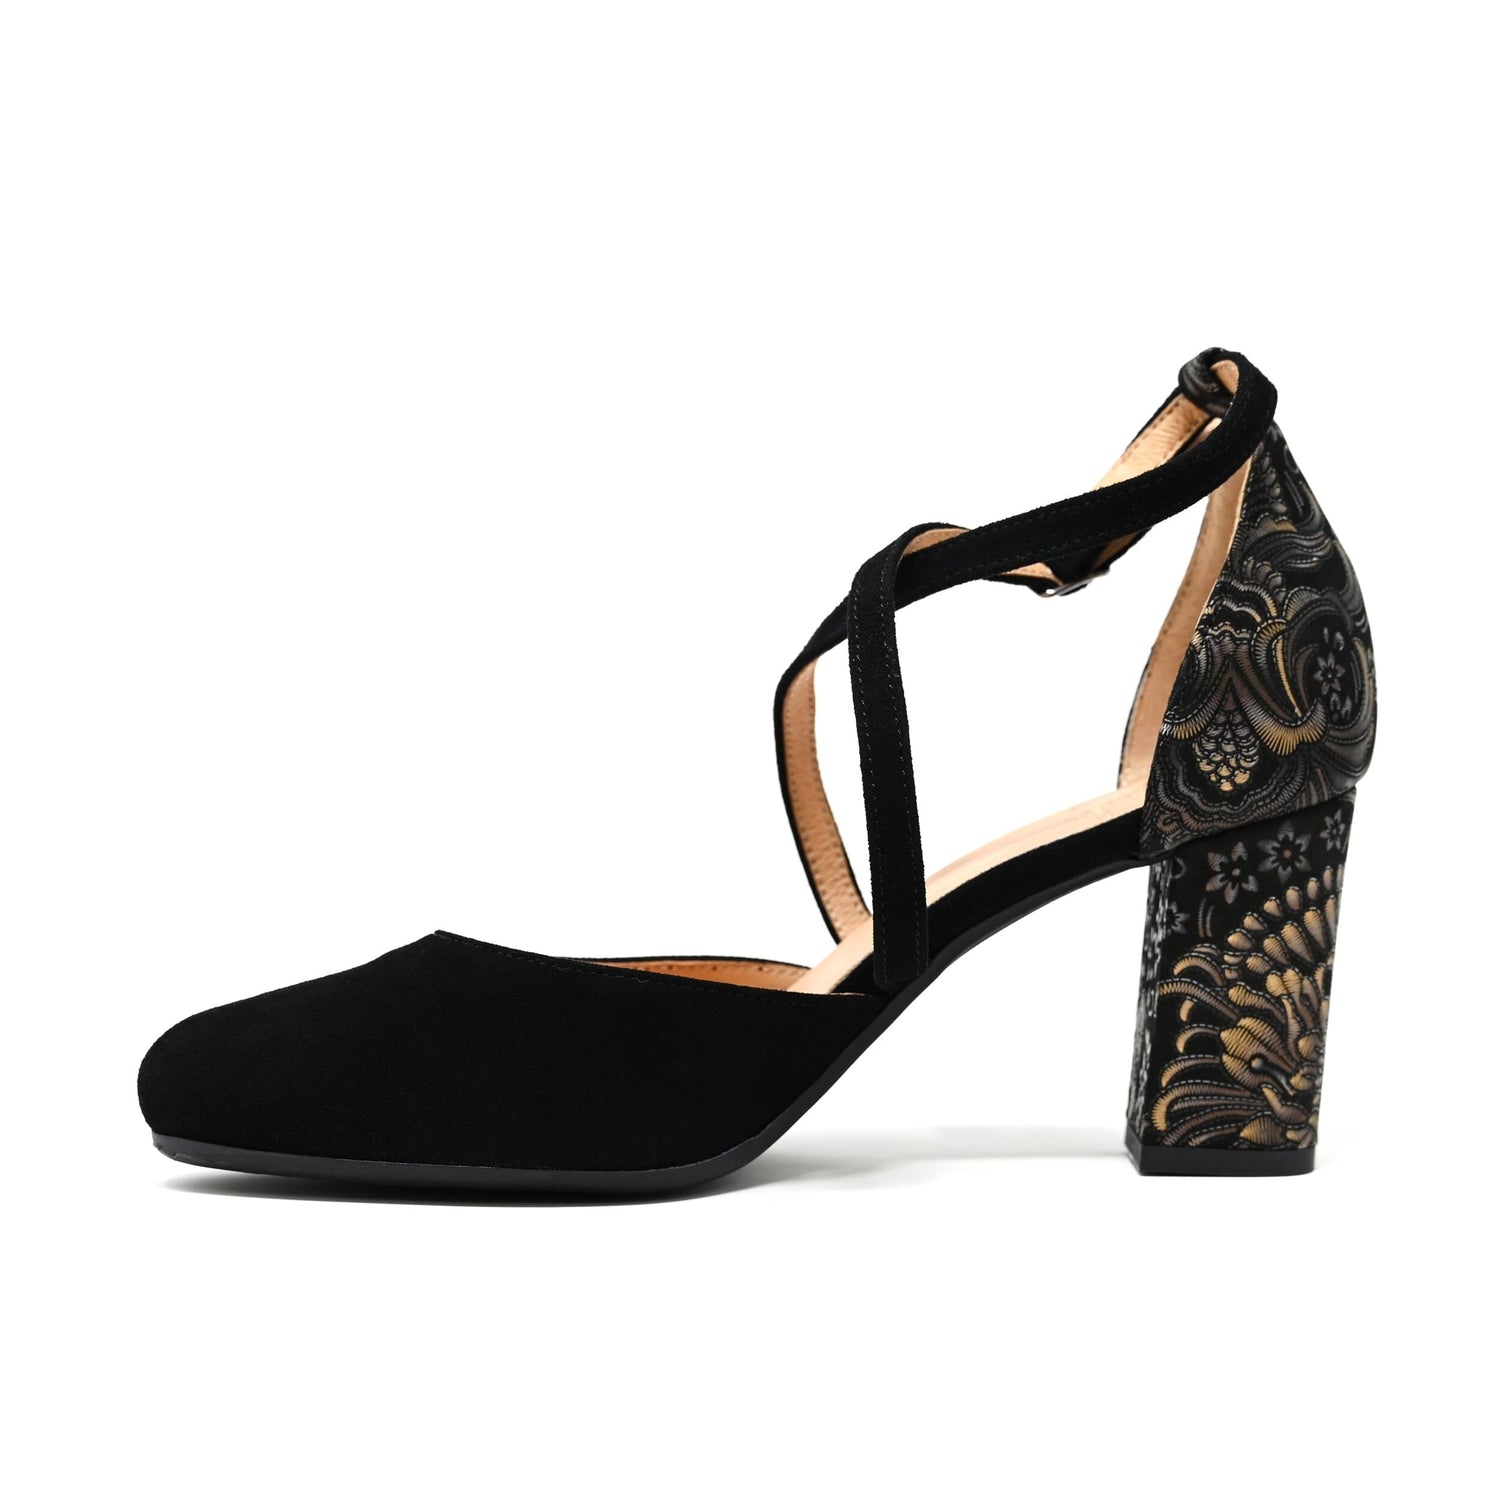 Kylie - Black & Gold Feathers Heels Embassy London 